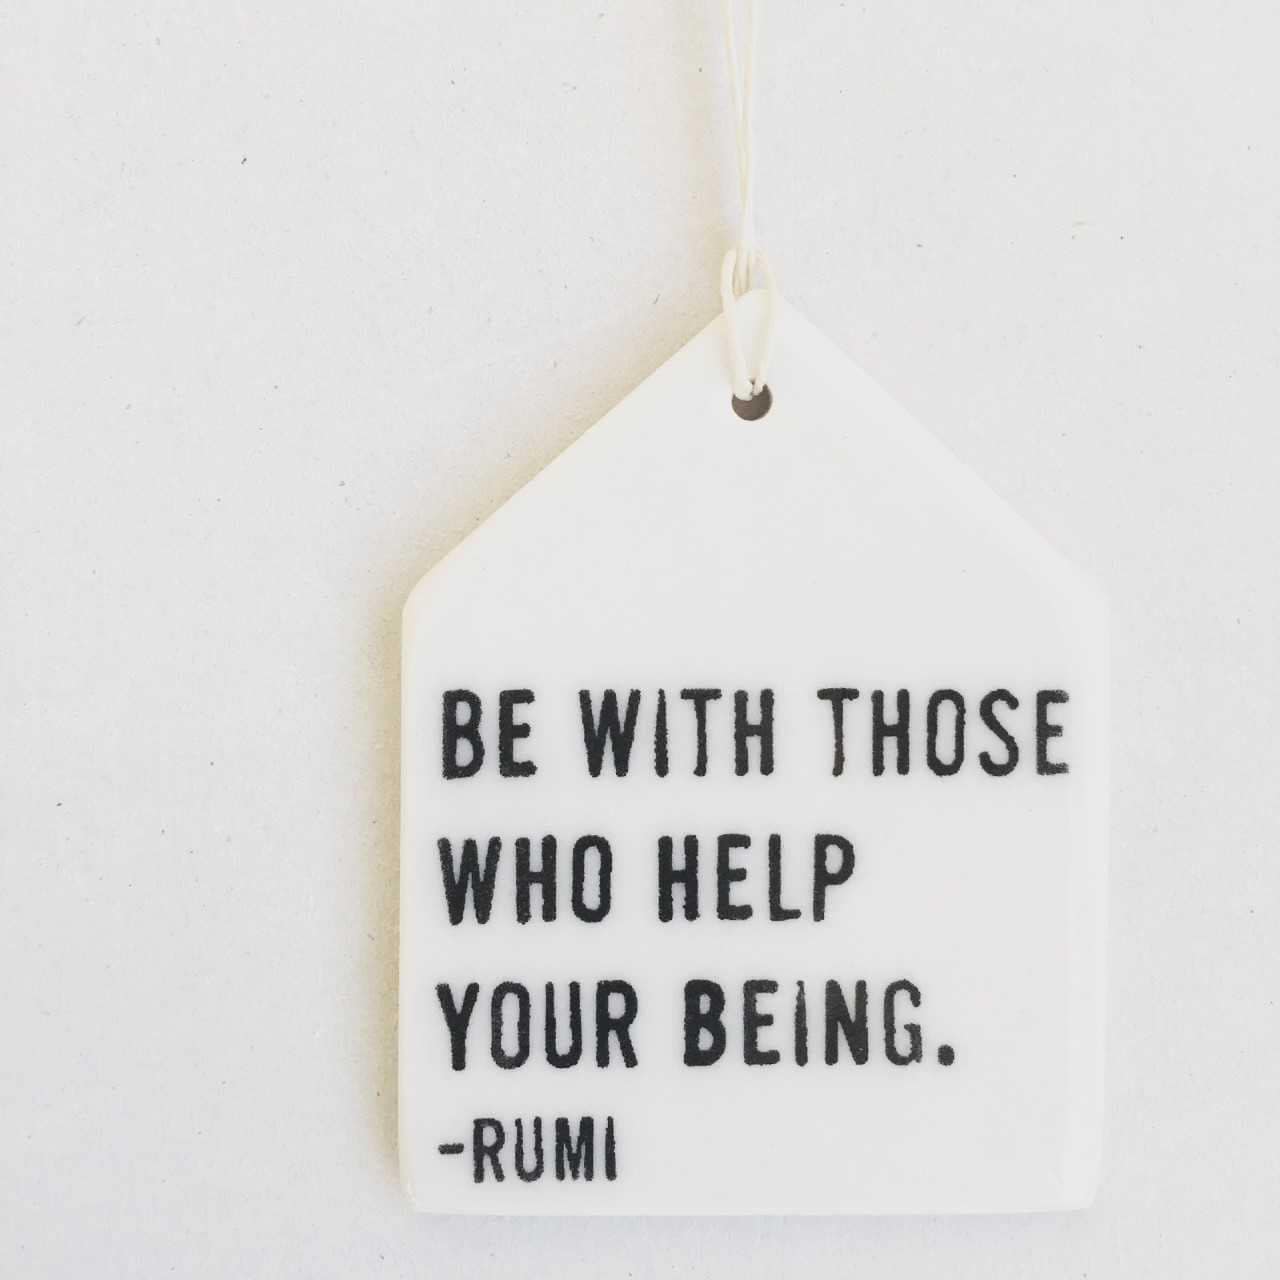 rumi quote | rumi wall hanging | rumi wall art | rumi poetry | rumi poem| ceramic wall tag | home decor | gift for friend | meaningful gift